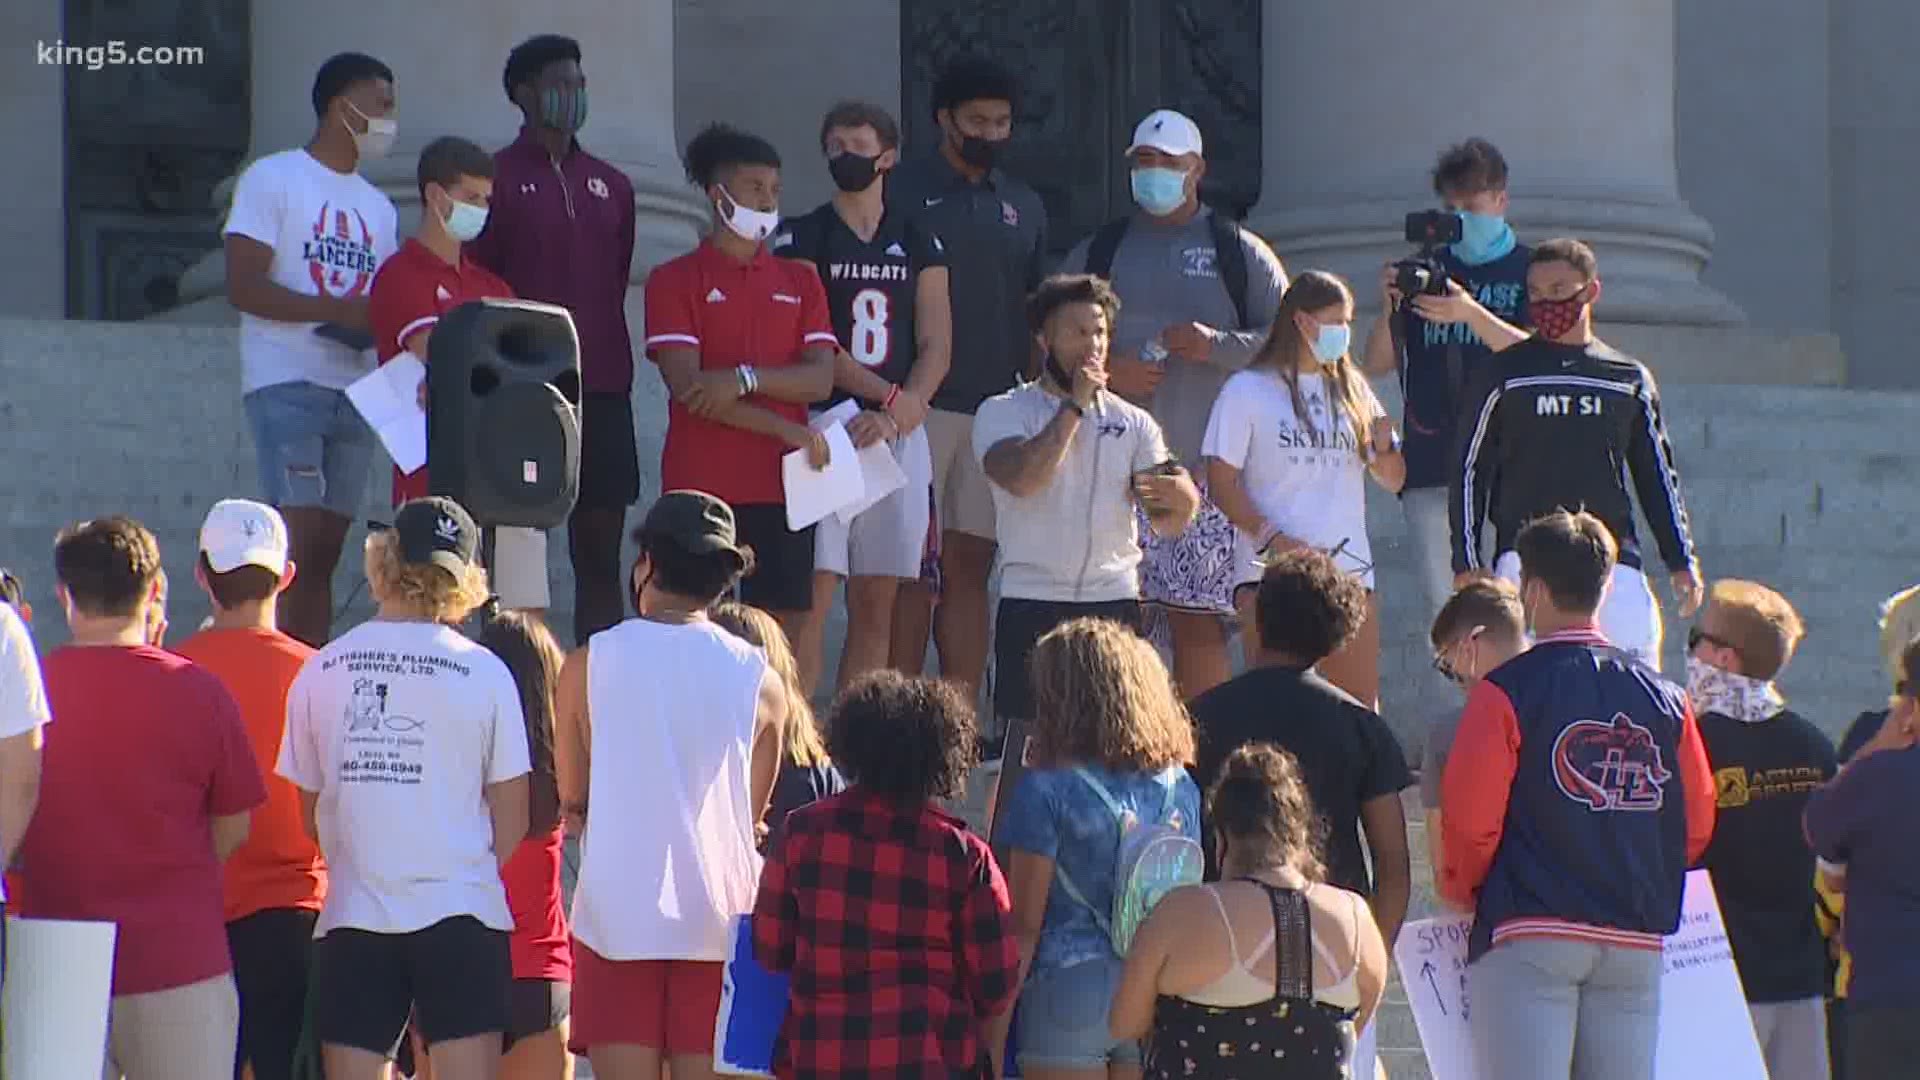 Student-athletes rallied on the Washington Capitol steps Thursday to play sports this fall after most activities were delayed by the COVID-19 pandemic.